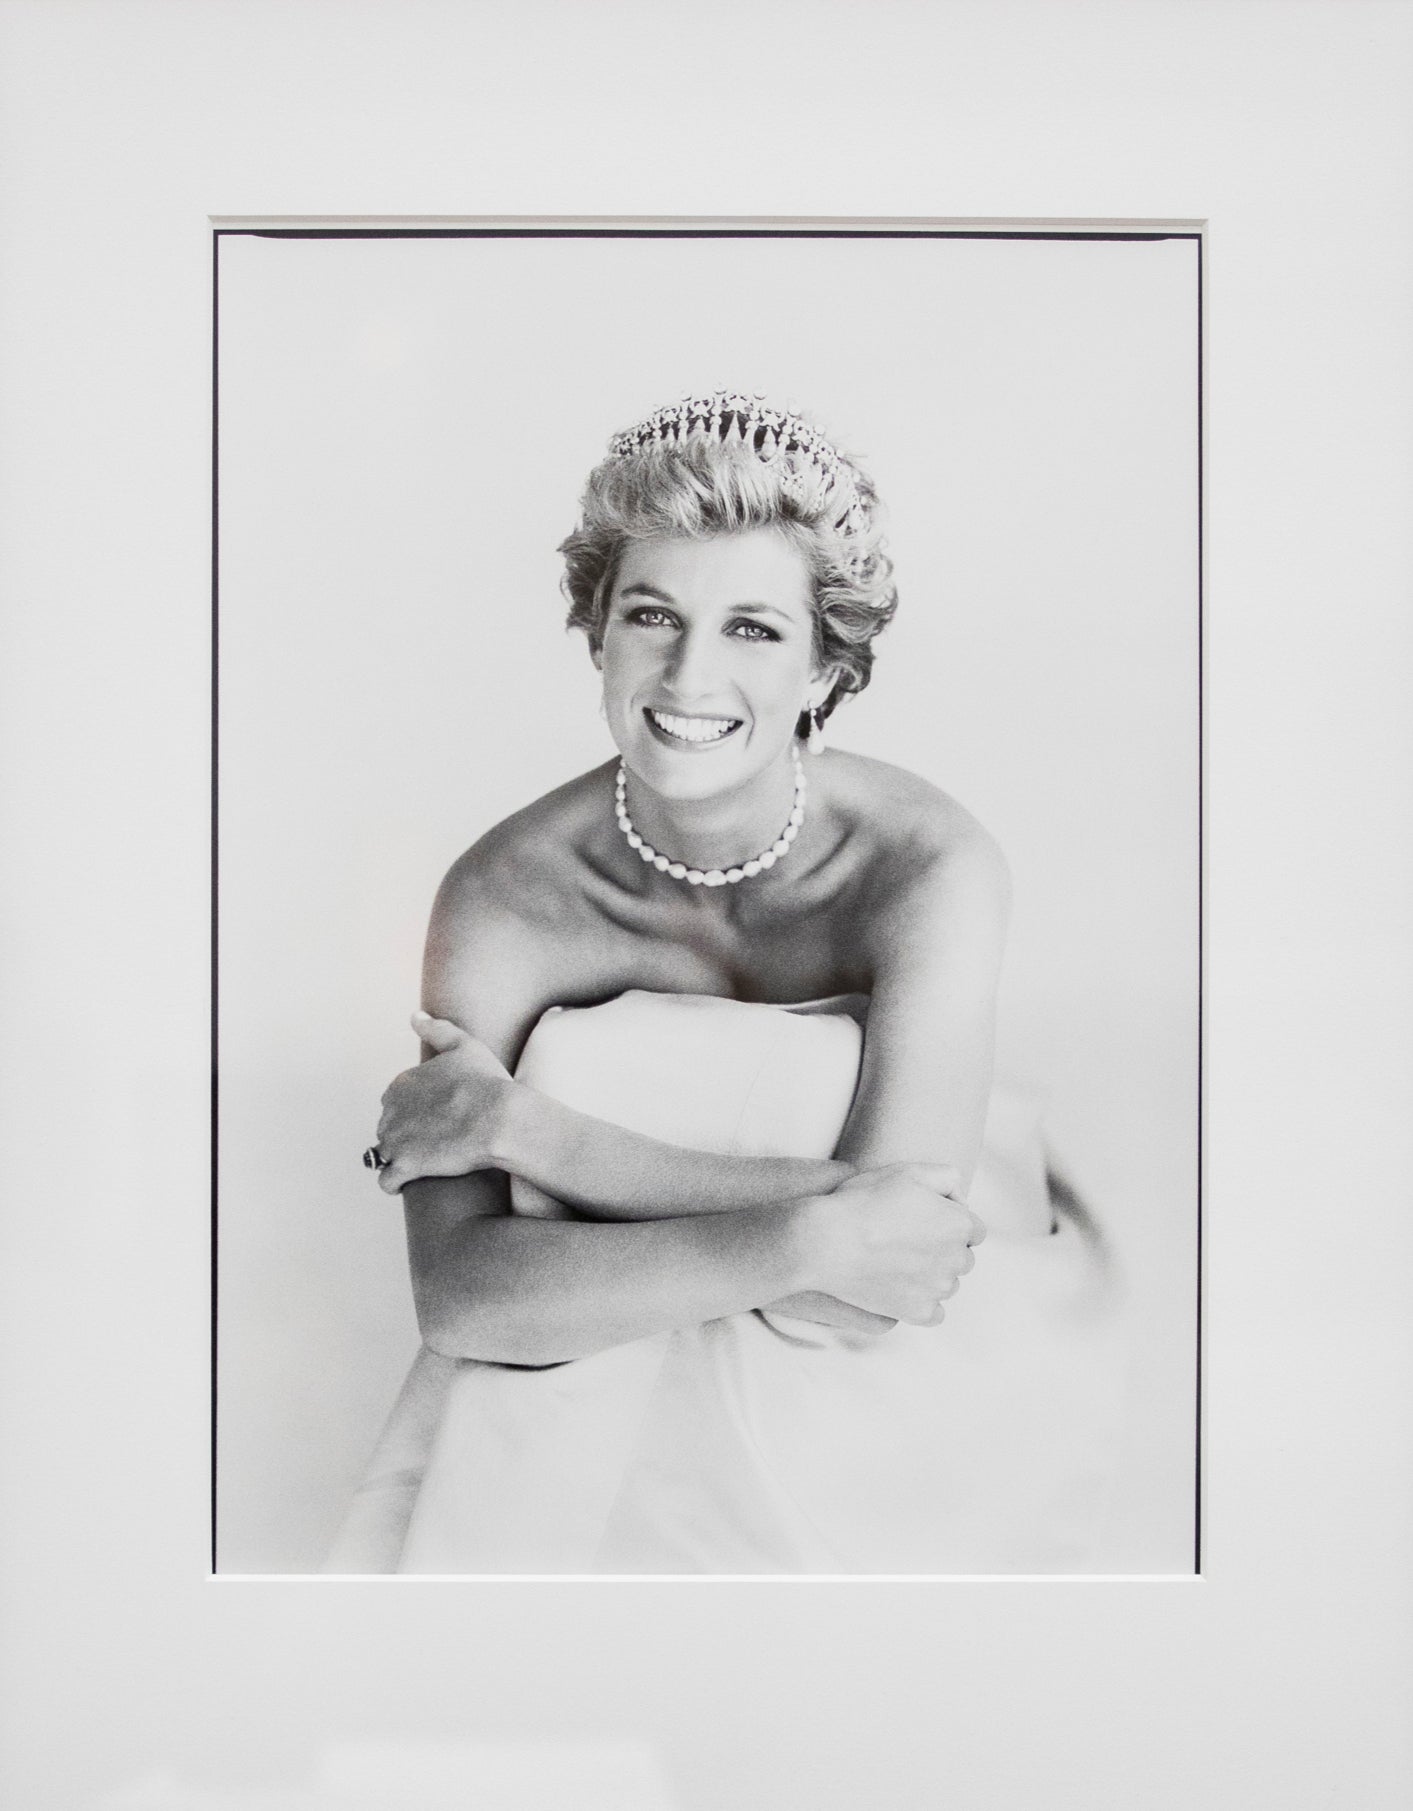 Demarchelier also shot this picture of Princess Diana